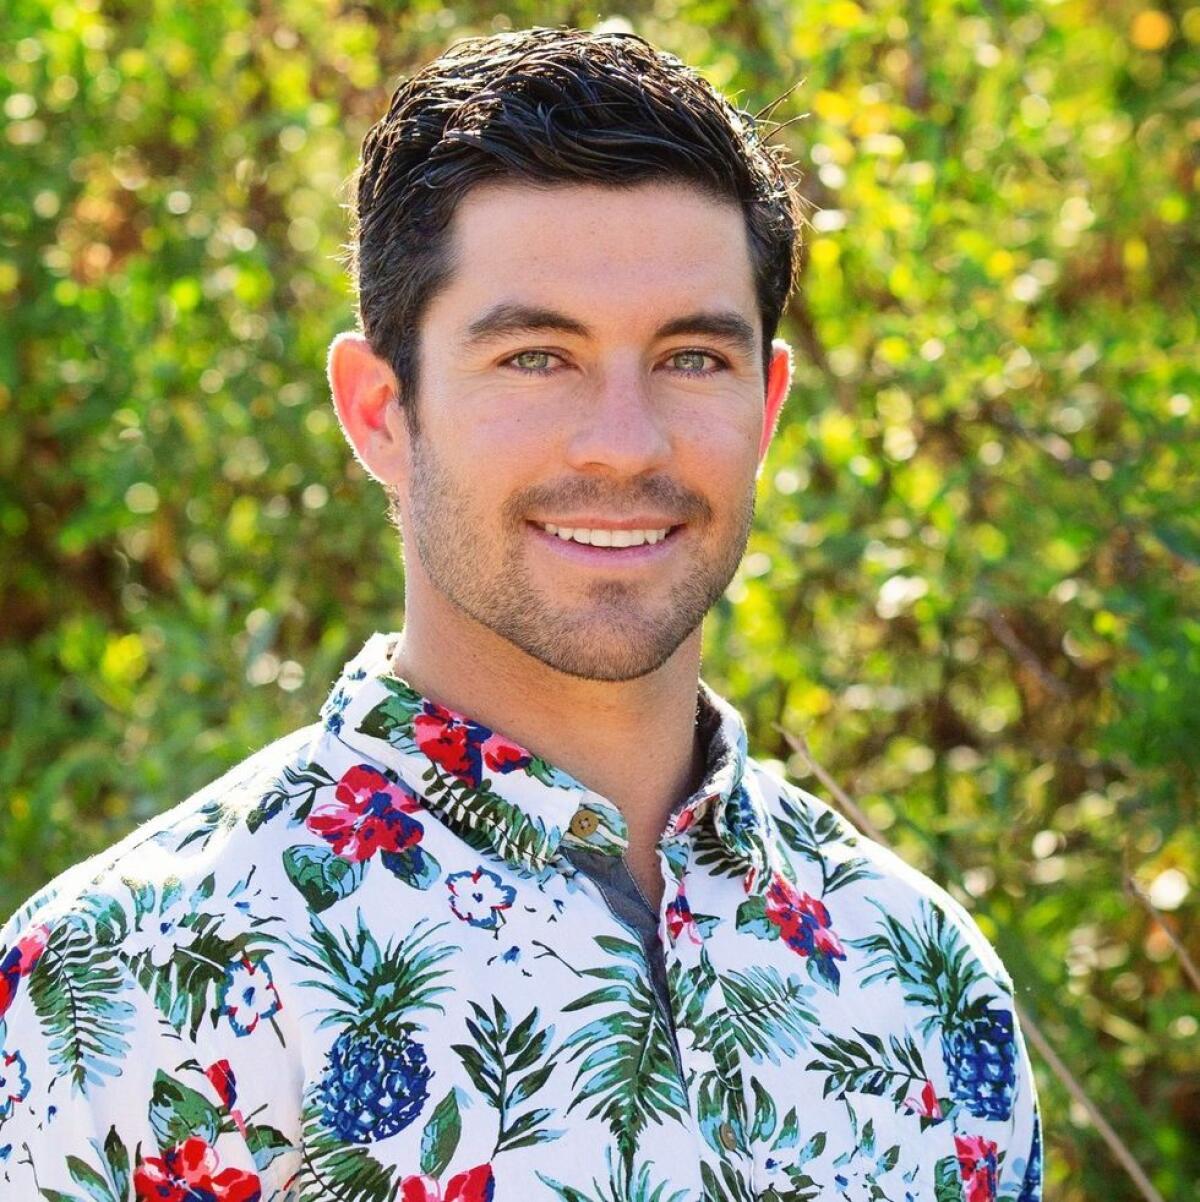 La Jolla resident Spencer Robertson is a suitor on ABC’s “The Bachelorette.”